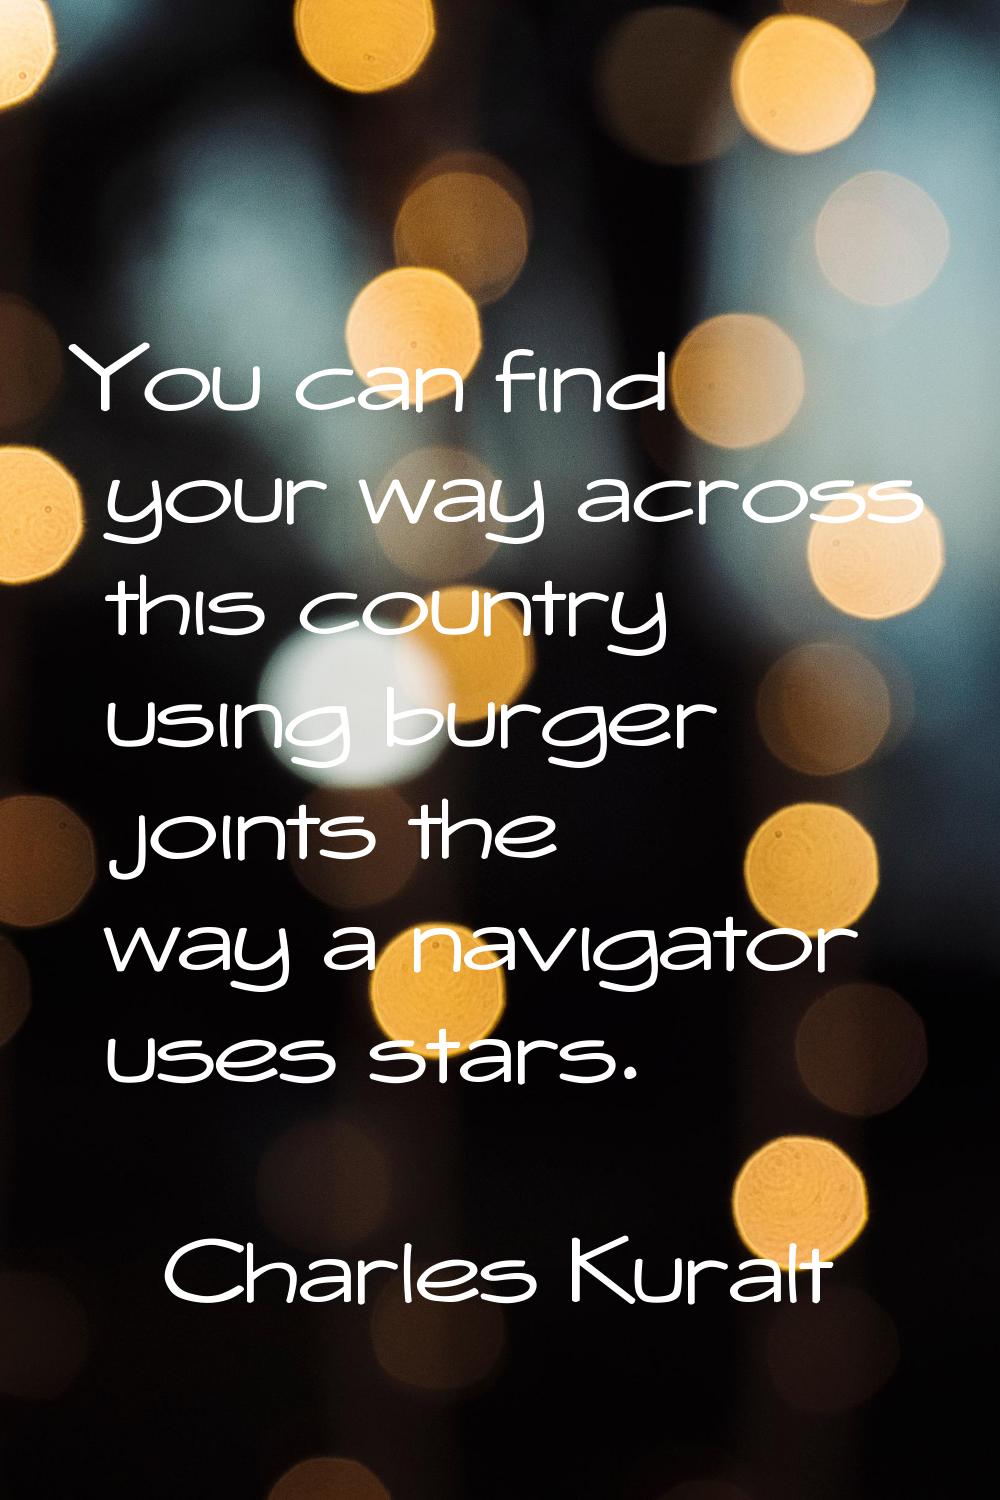 You can find your way across this country using burger joints the way a navigator uses stars.